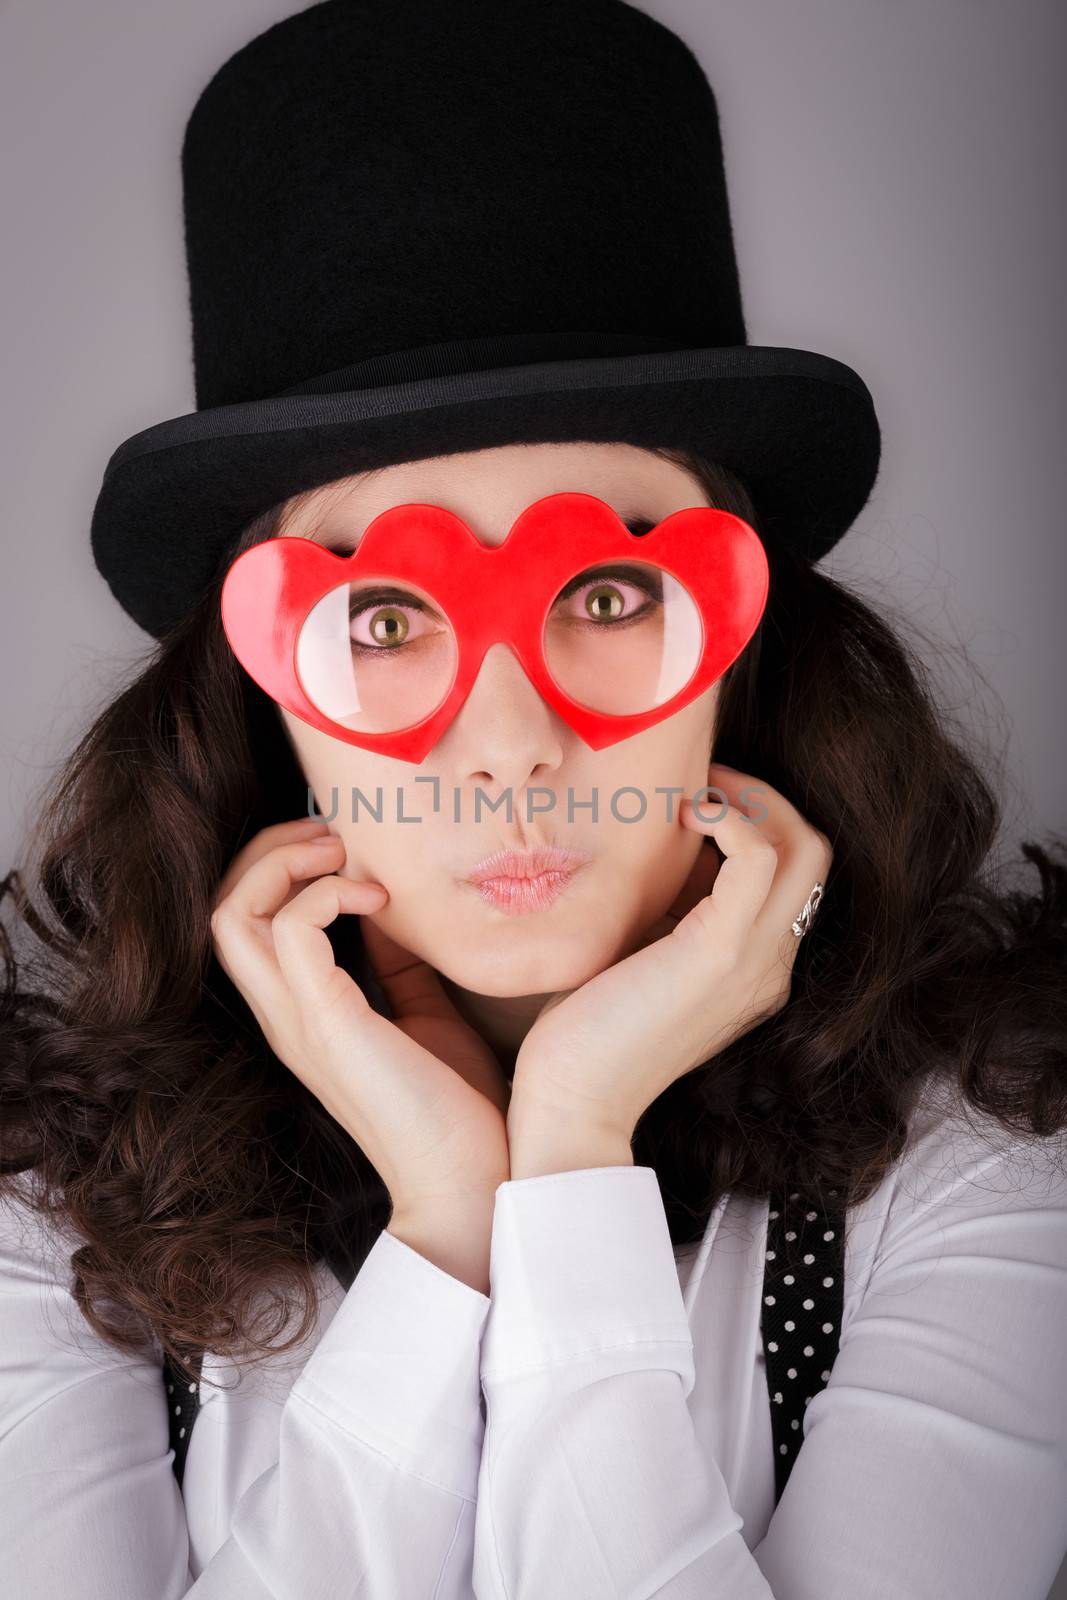 Girl with Heart-Shaped Glasses and Top Hat by NicoletaIonescu